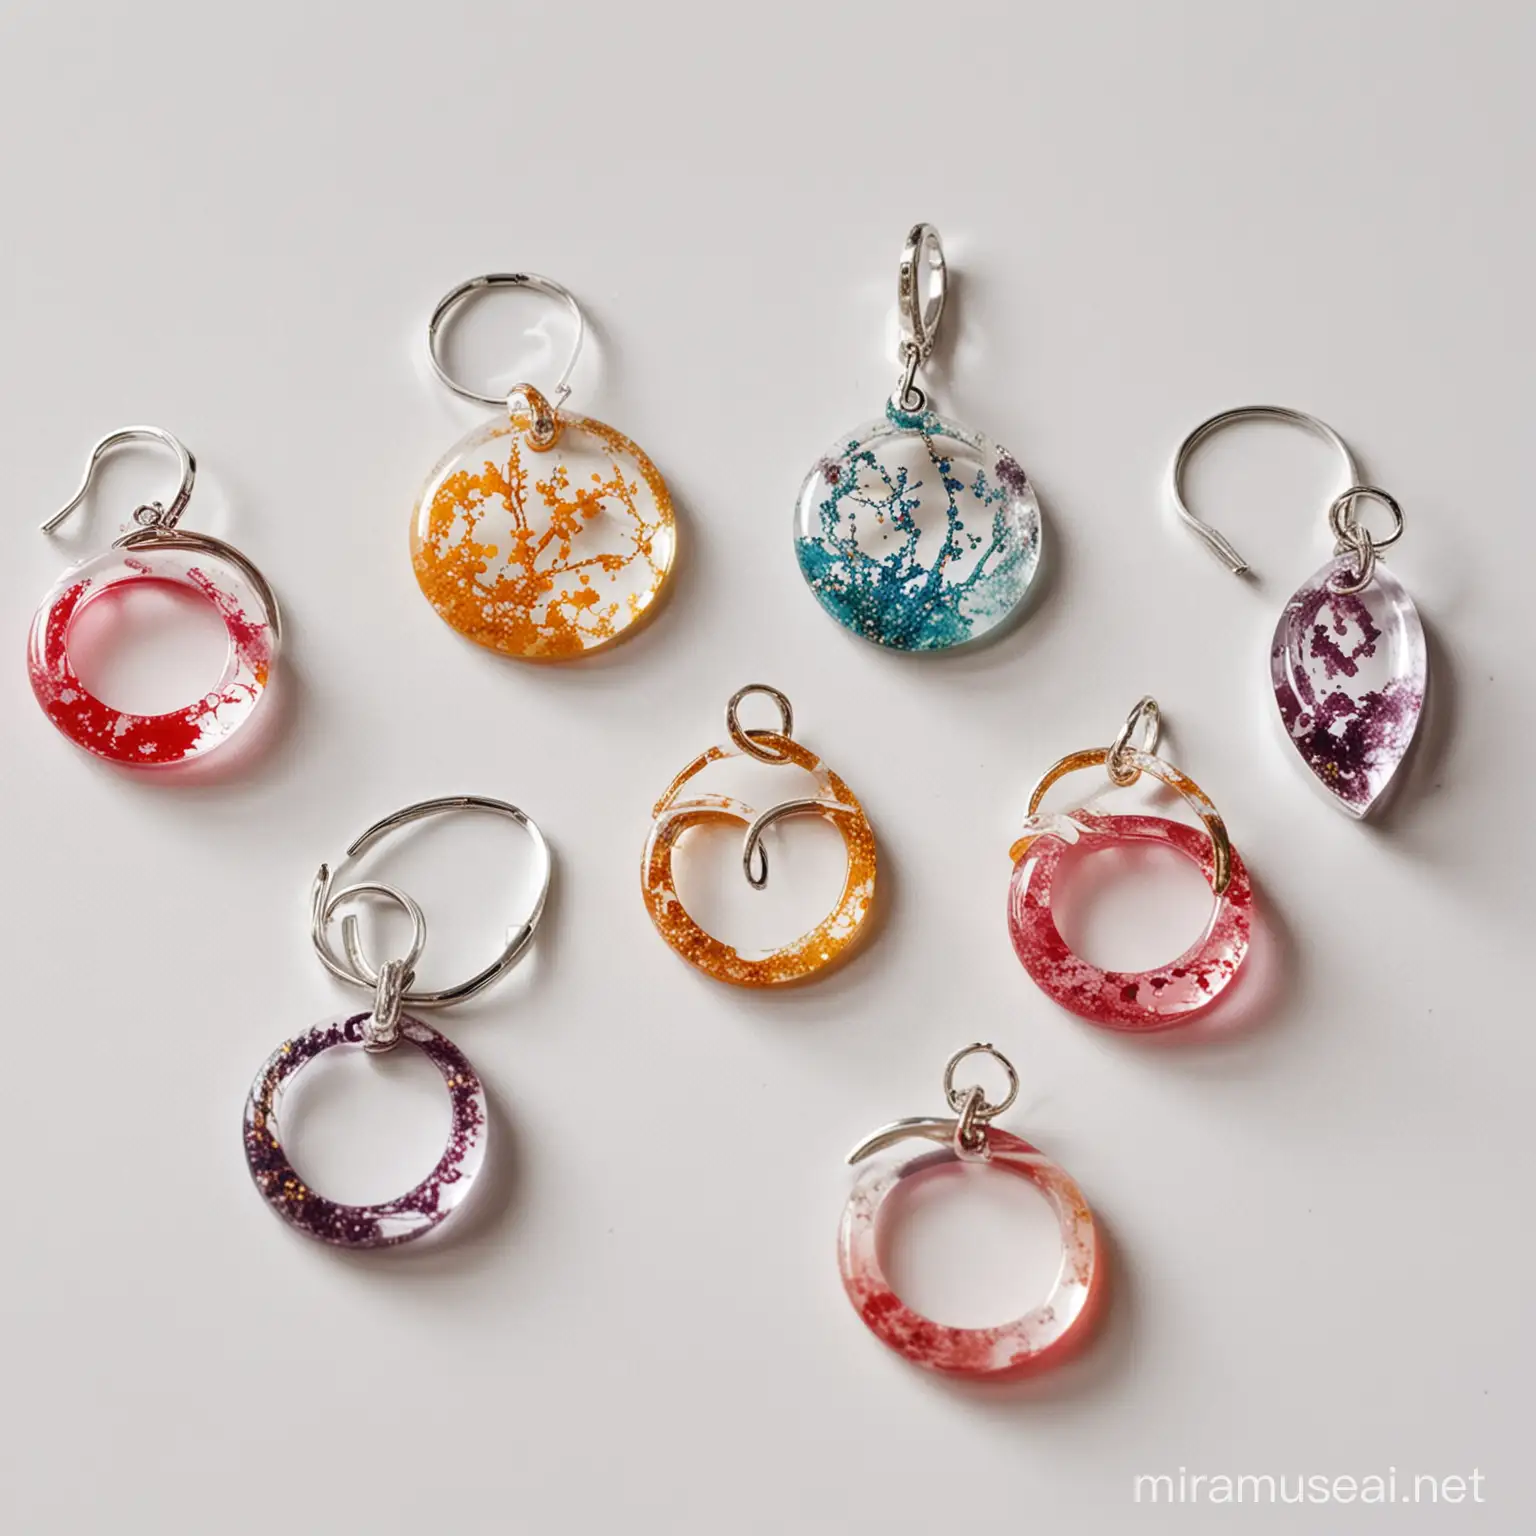 Elegant Epoxy Resin Jewelry Collection with White Background